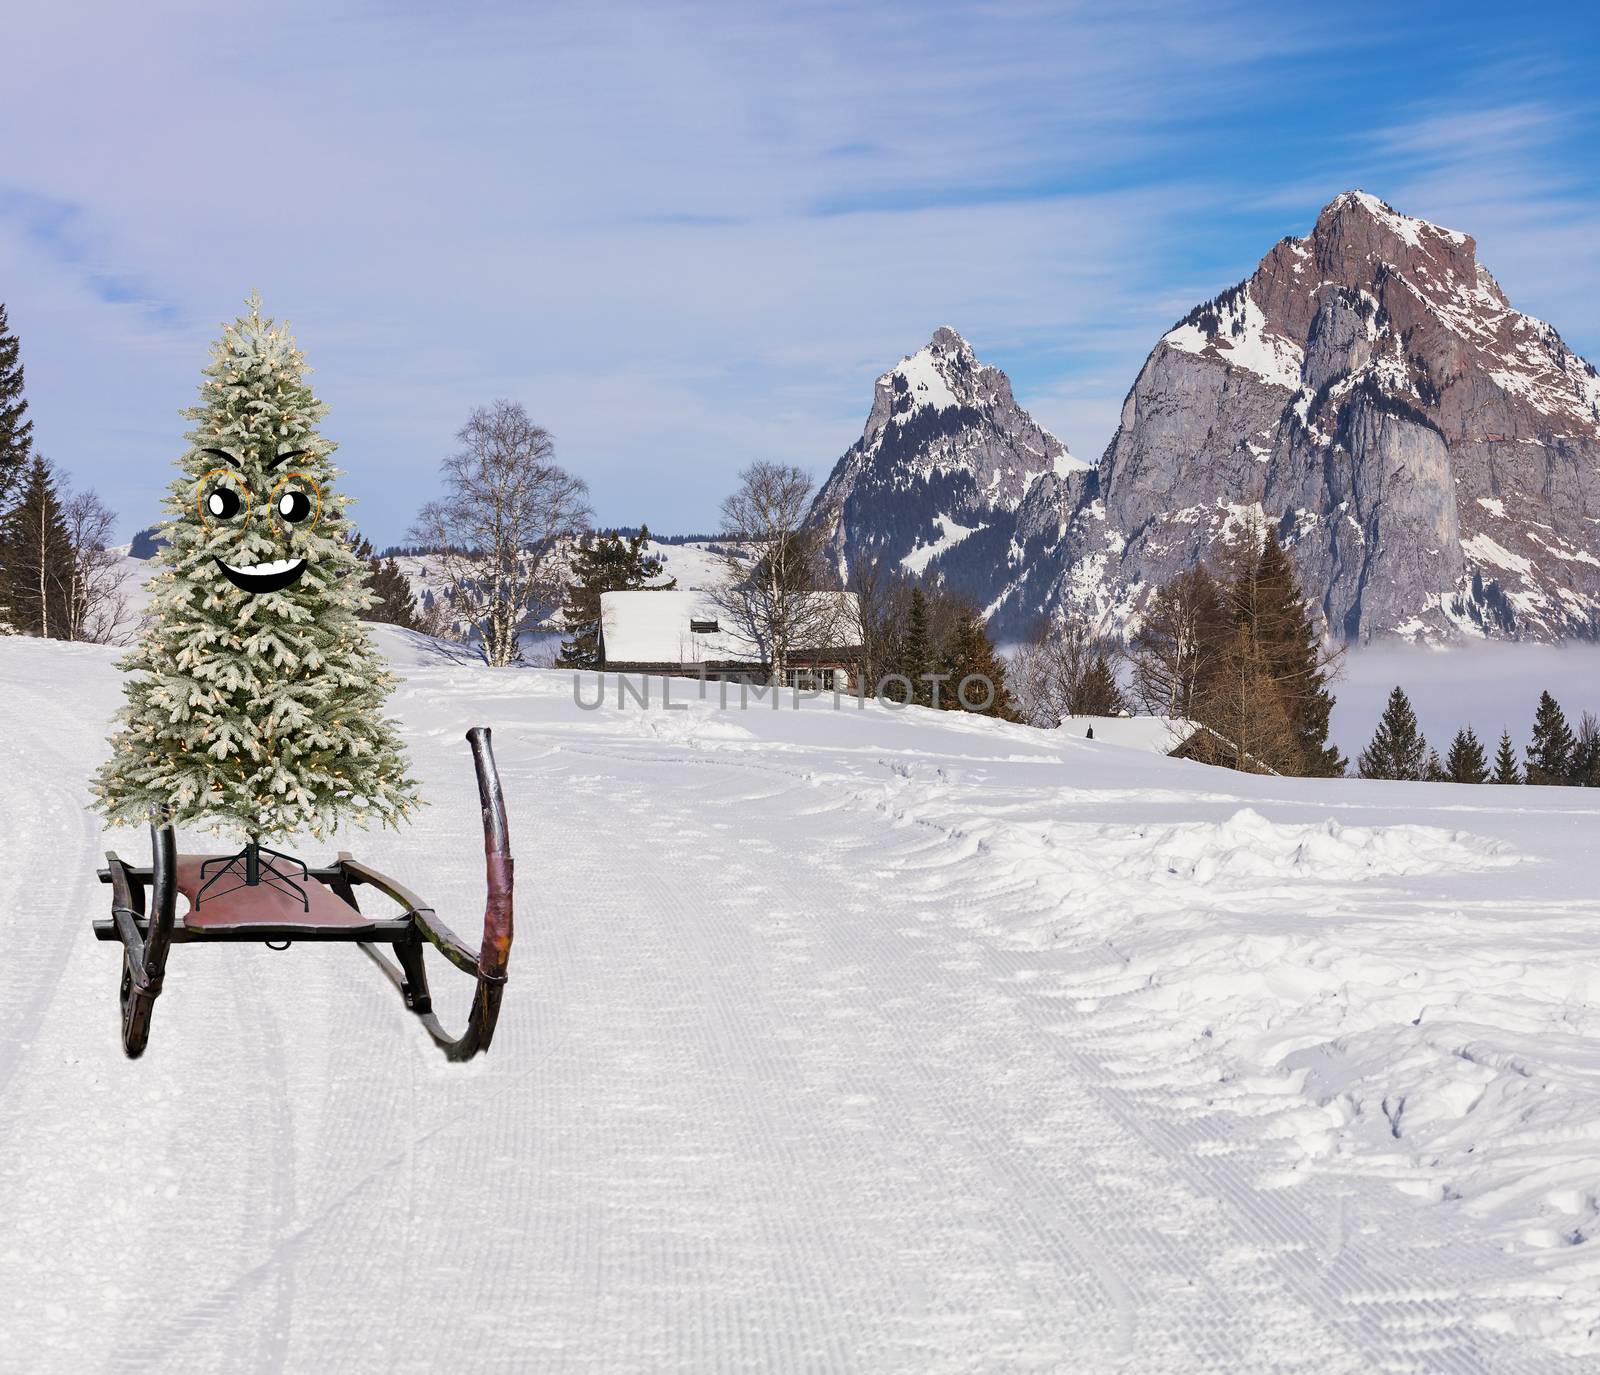 Merry christmas a happy smiling christmas pine tree sliding down hill on a sled in a winter mountain landscape by charlottebleijenberg